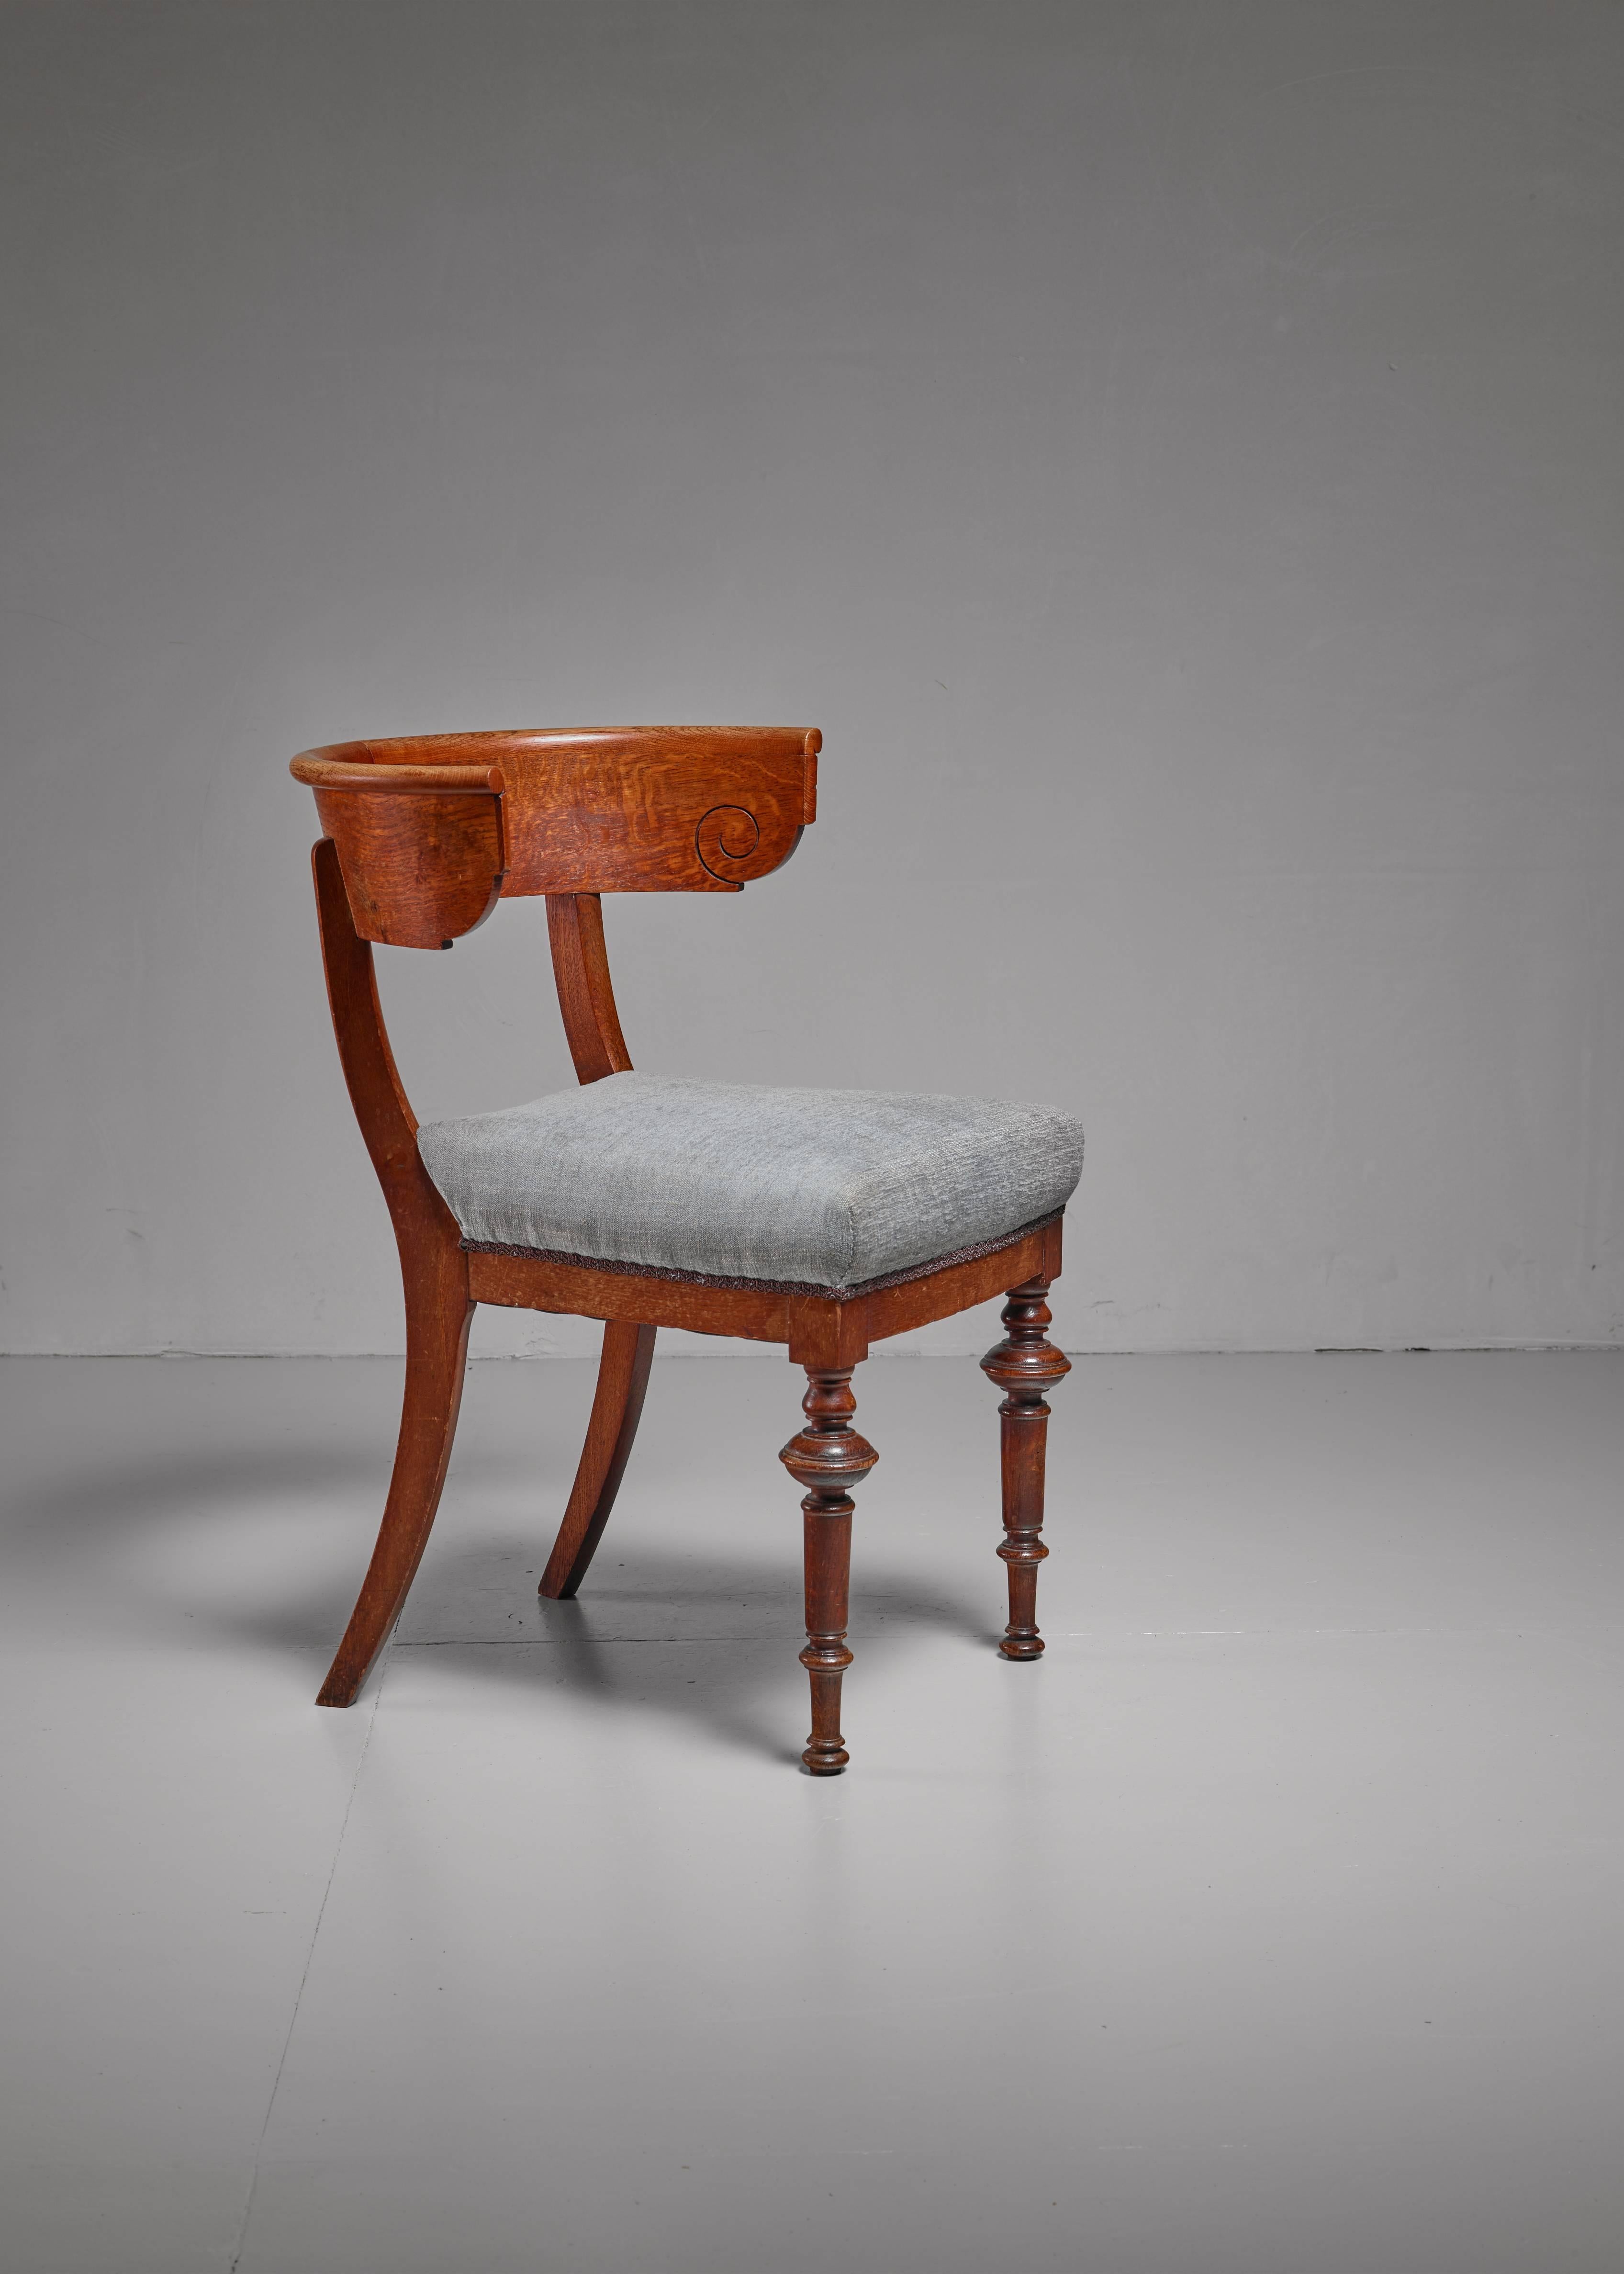 An early 20th century Danish Klismos chair made of oak with sculpted front legs and sabre back legs and has a blue grey fabric upholstery. The chair has been professionally reupholstered in our in-house atelier.
 